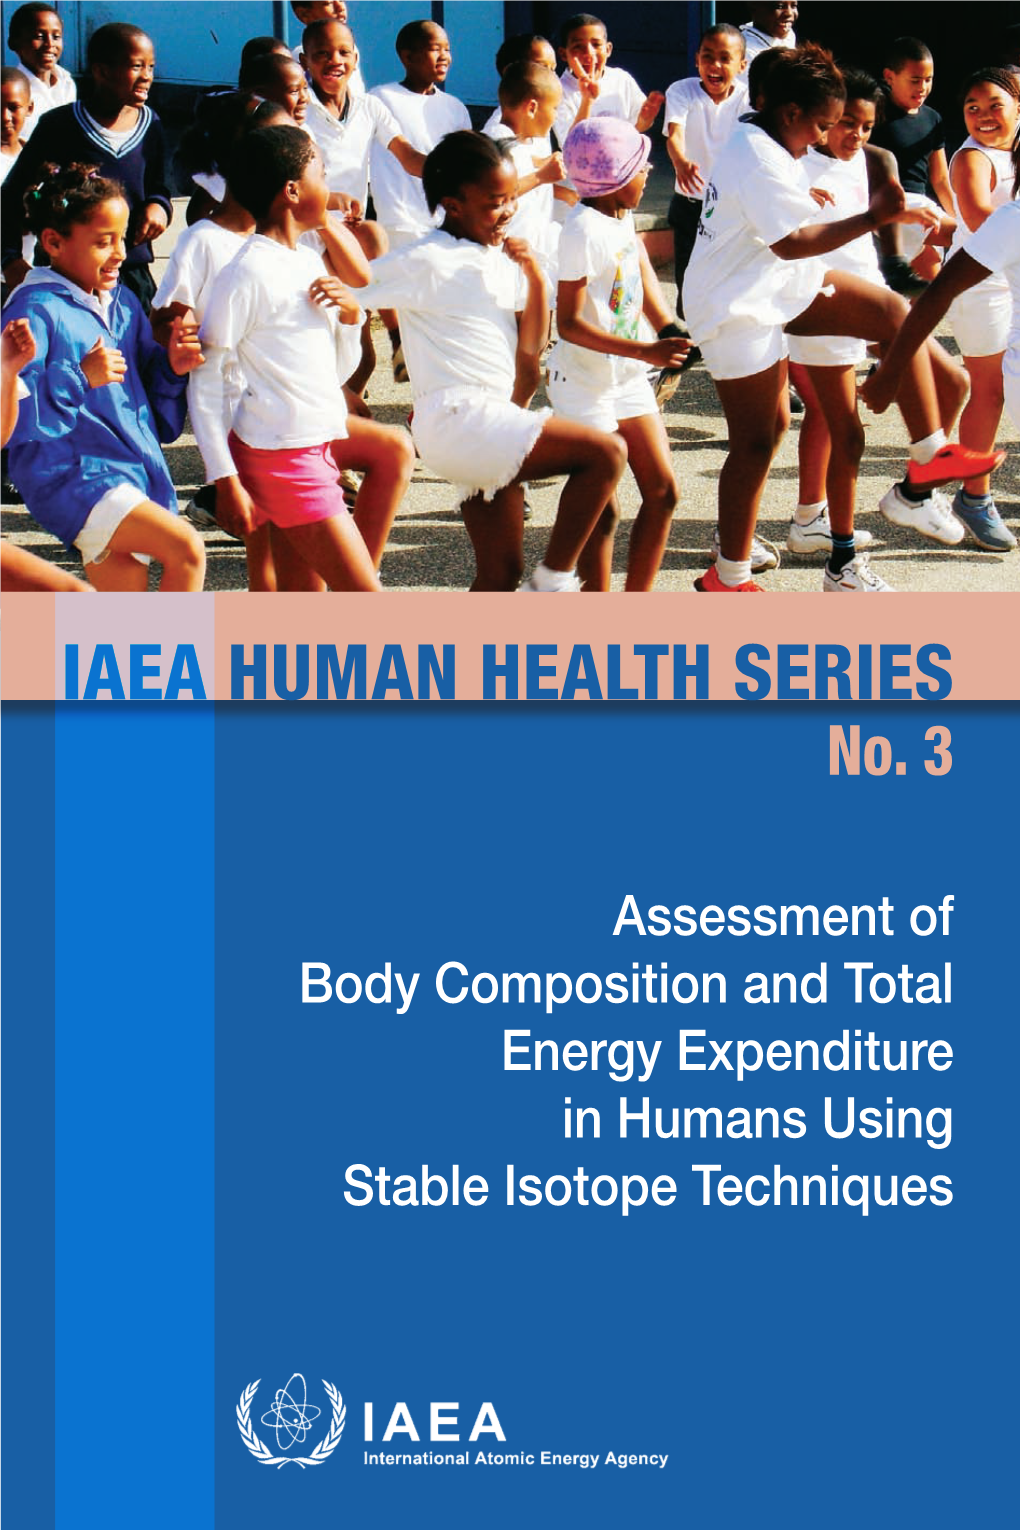 Assessment of Body Composition and Total Energy Expenditure in Humans Using Stable Isotope Techniques No